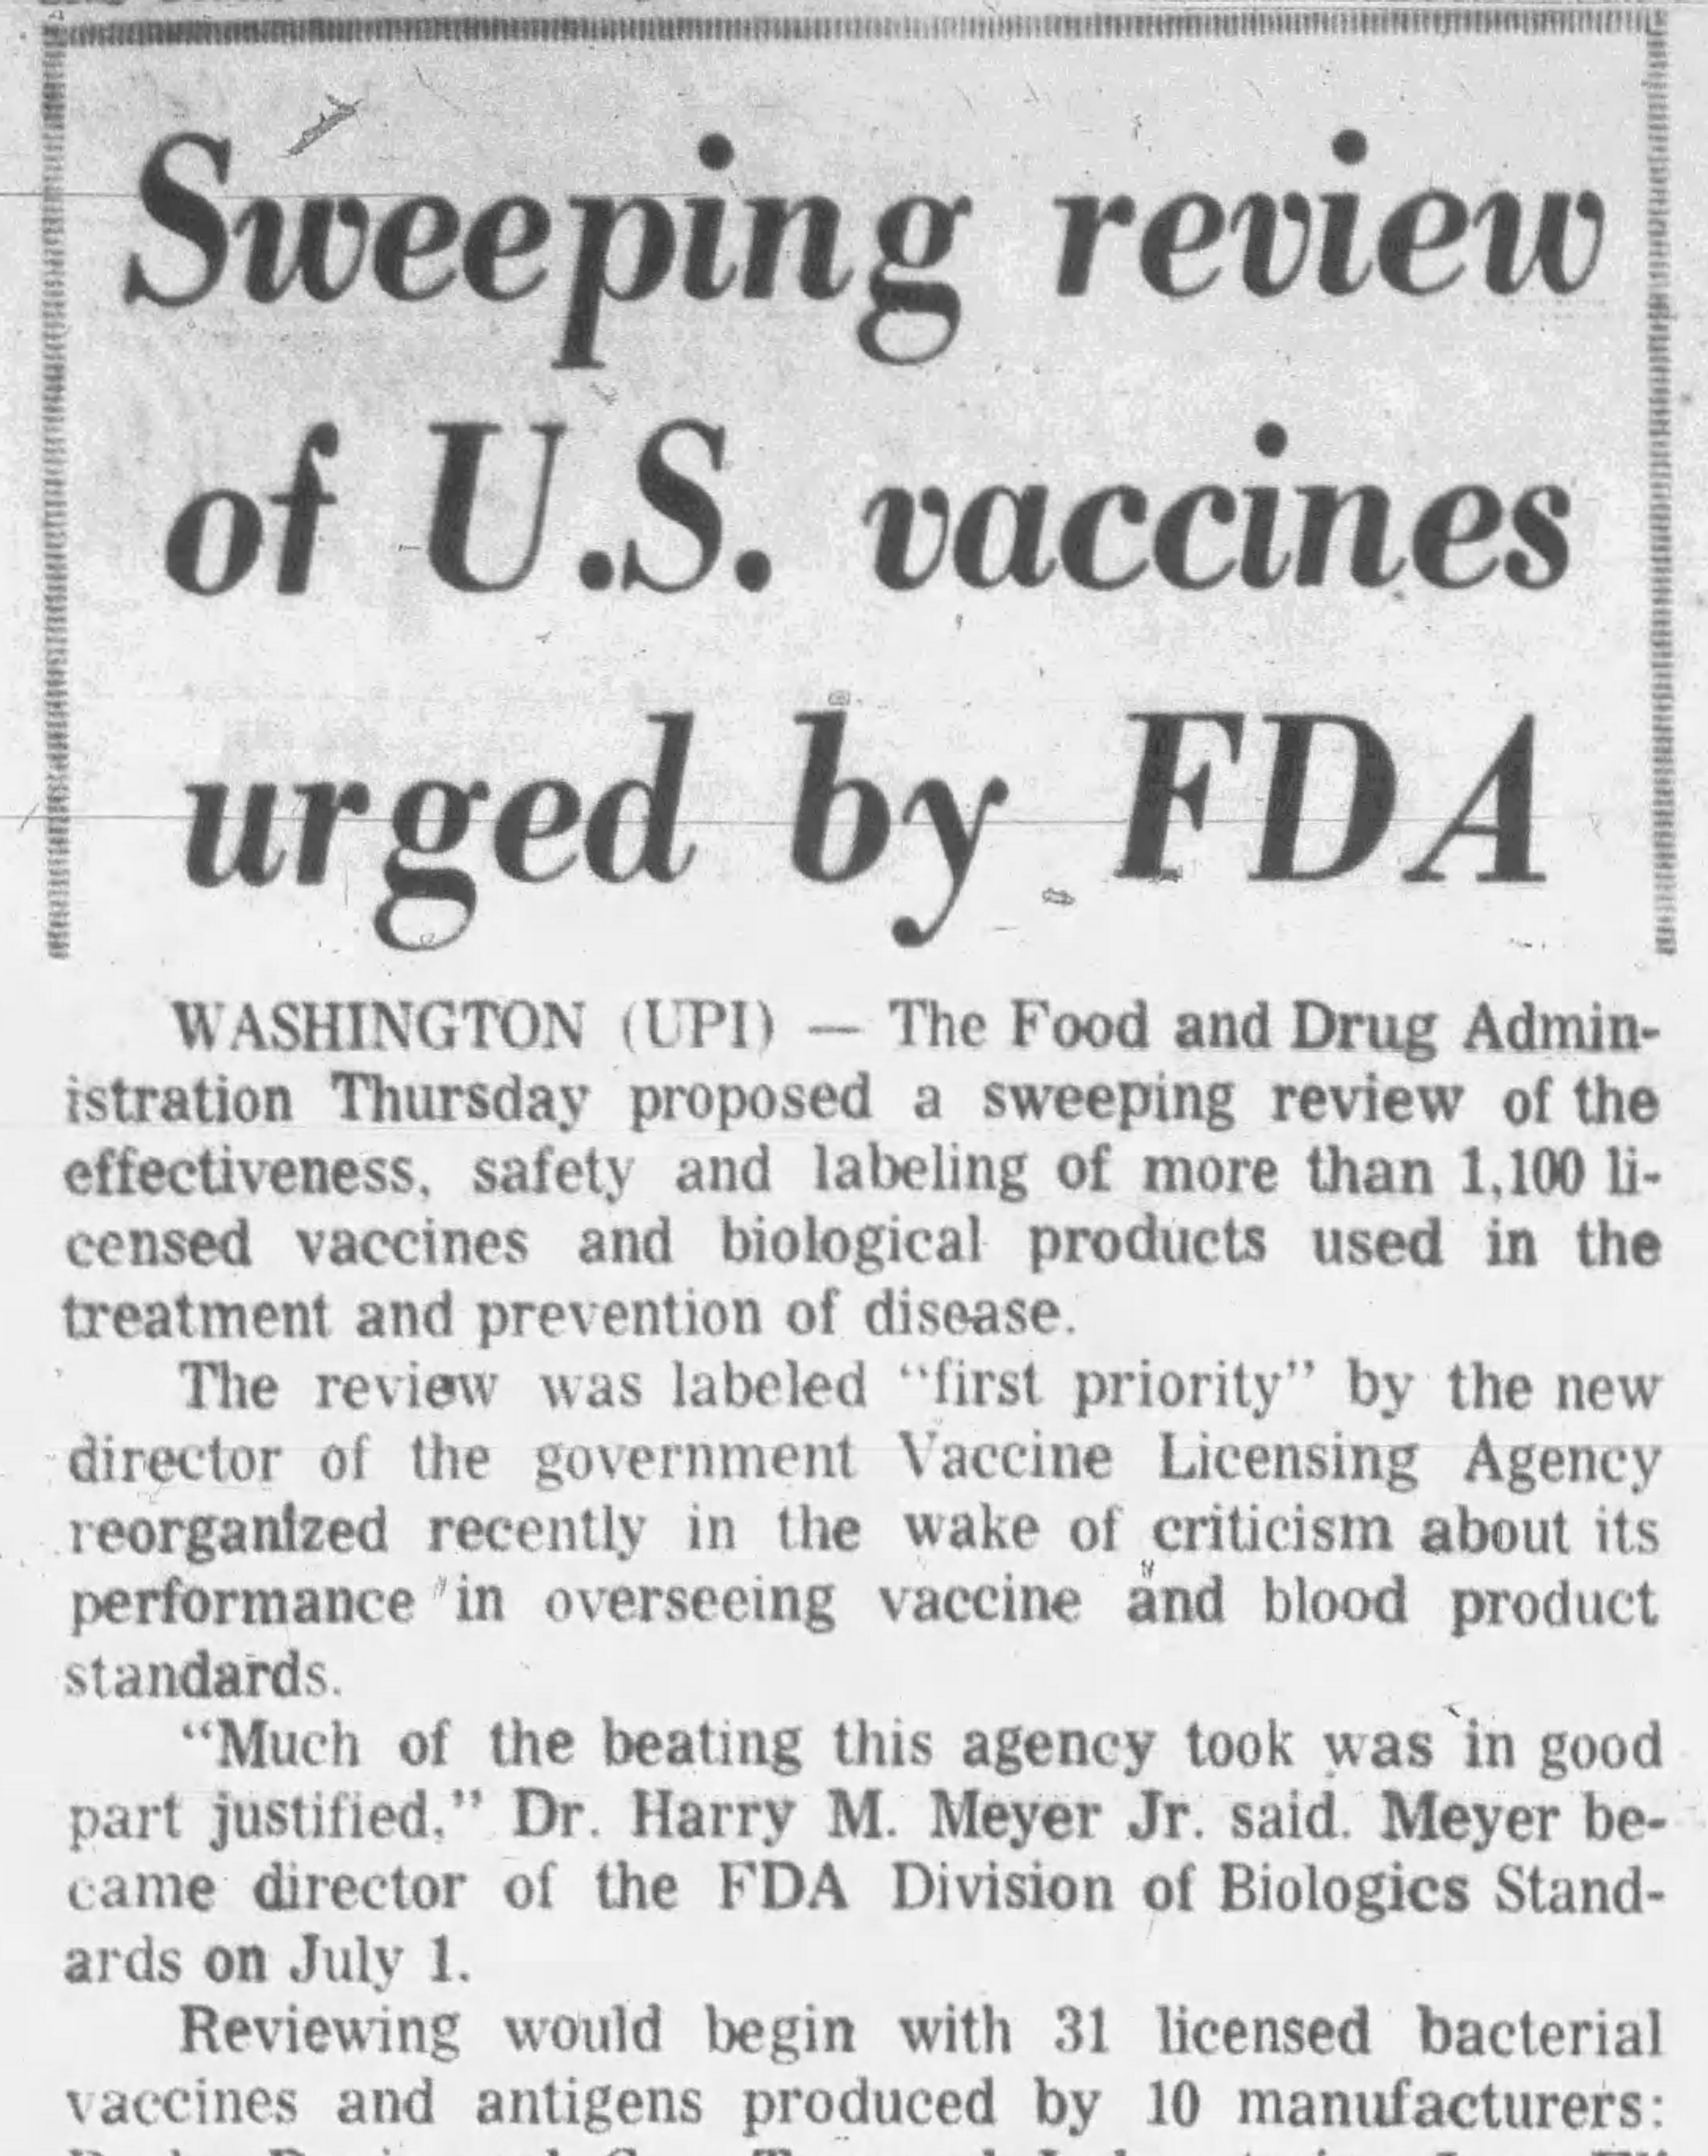 a 1972 newspaper clipping about a sweeping review of vaccines urged by the FDA